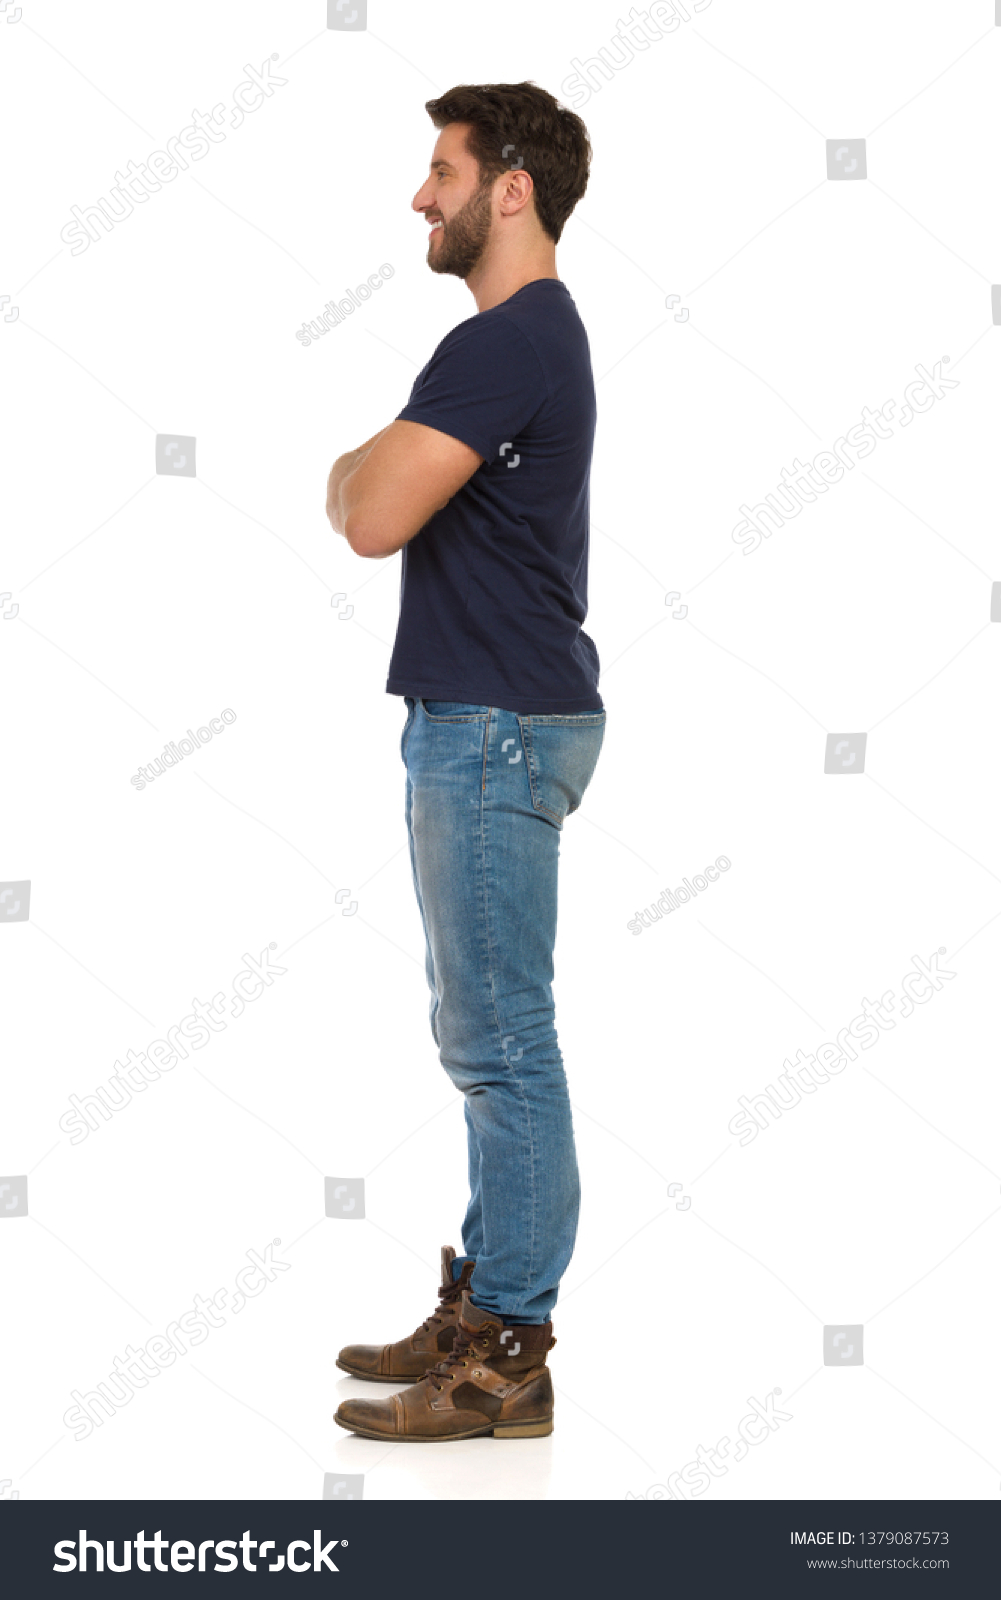 Deform tone complicated Side View Of A Men In Jeans Trousers Stock Photo By